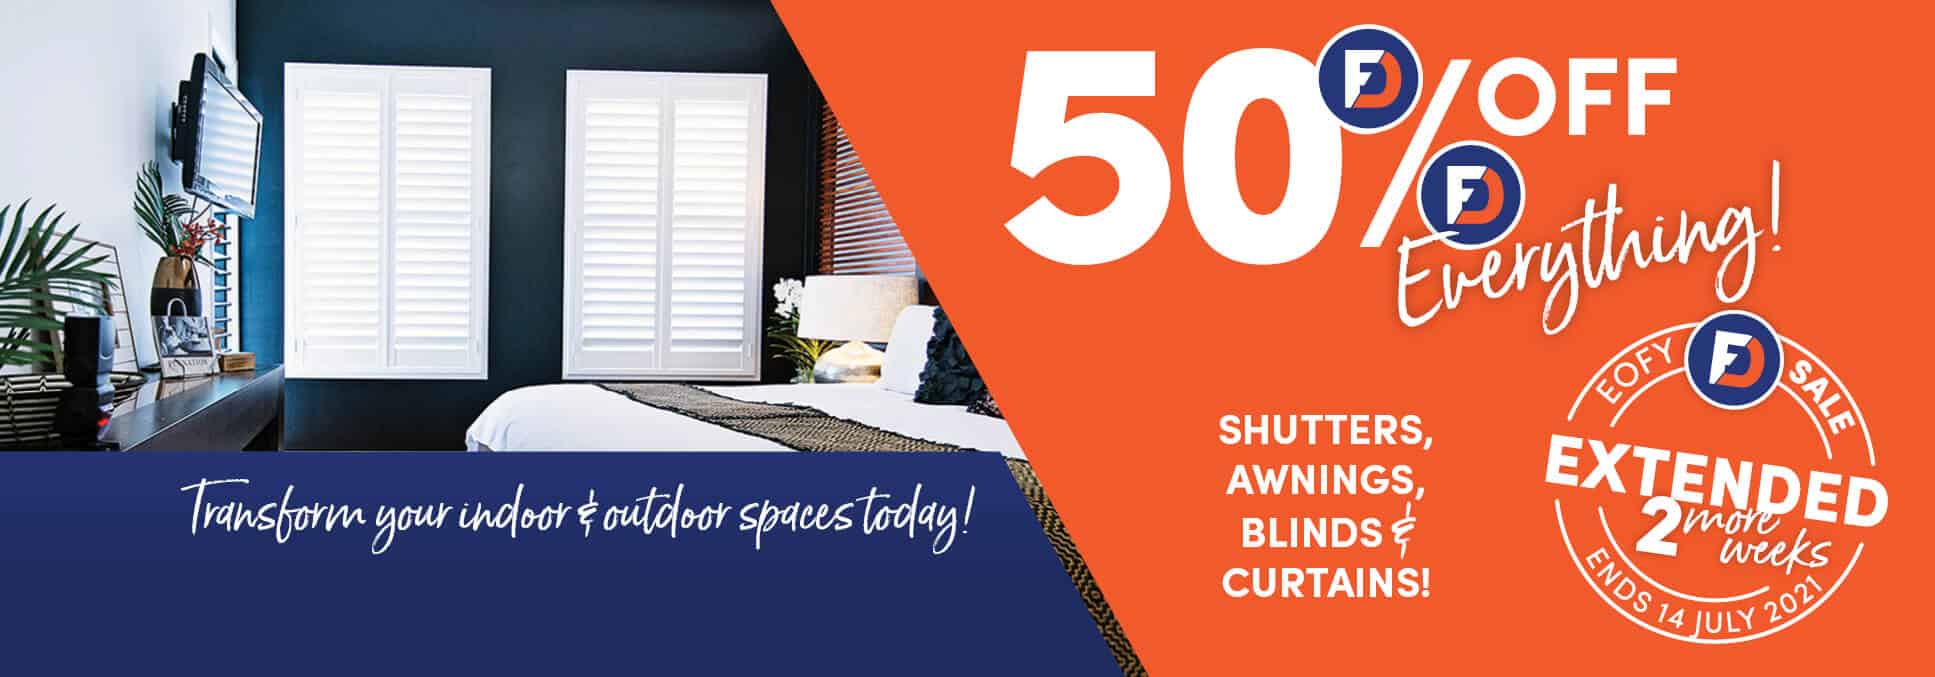 Shutters, Awnings & Blinds | Factory Direct